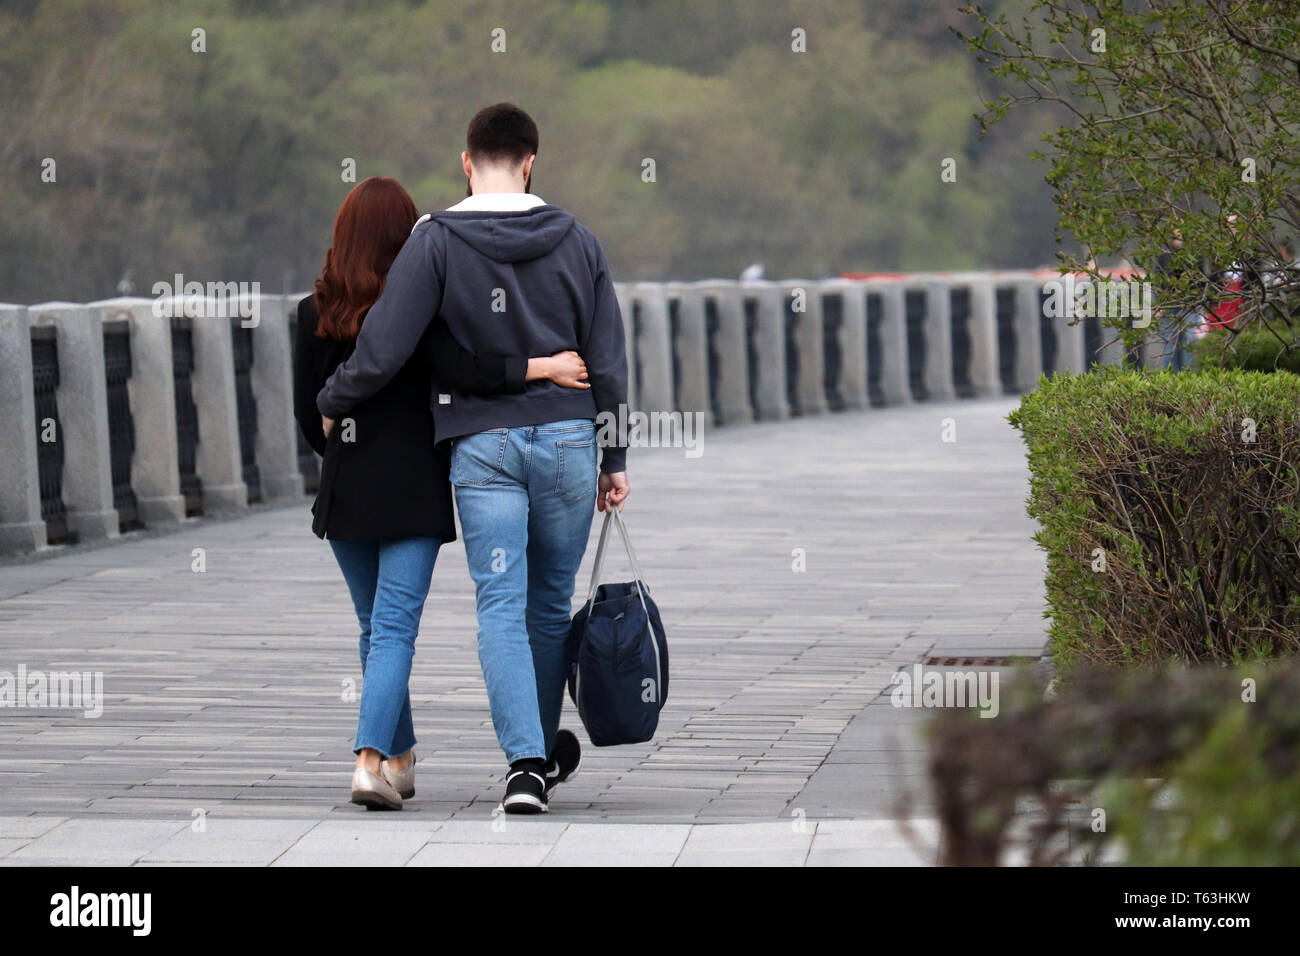 Couple in love hugging and walking in a park, rear view. Embracing guy and girl on romantic date, people in jeans, relationship, real feelings Stock Photo